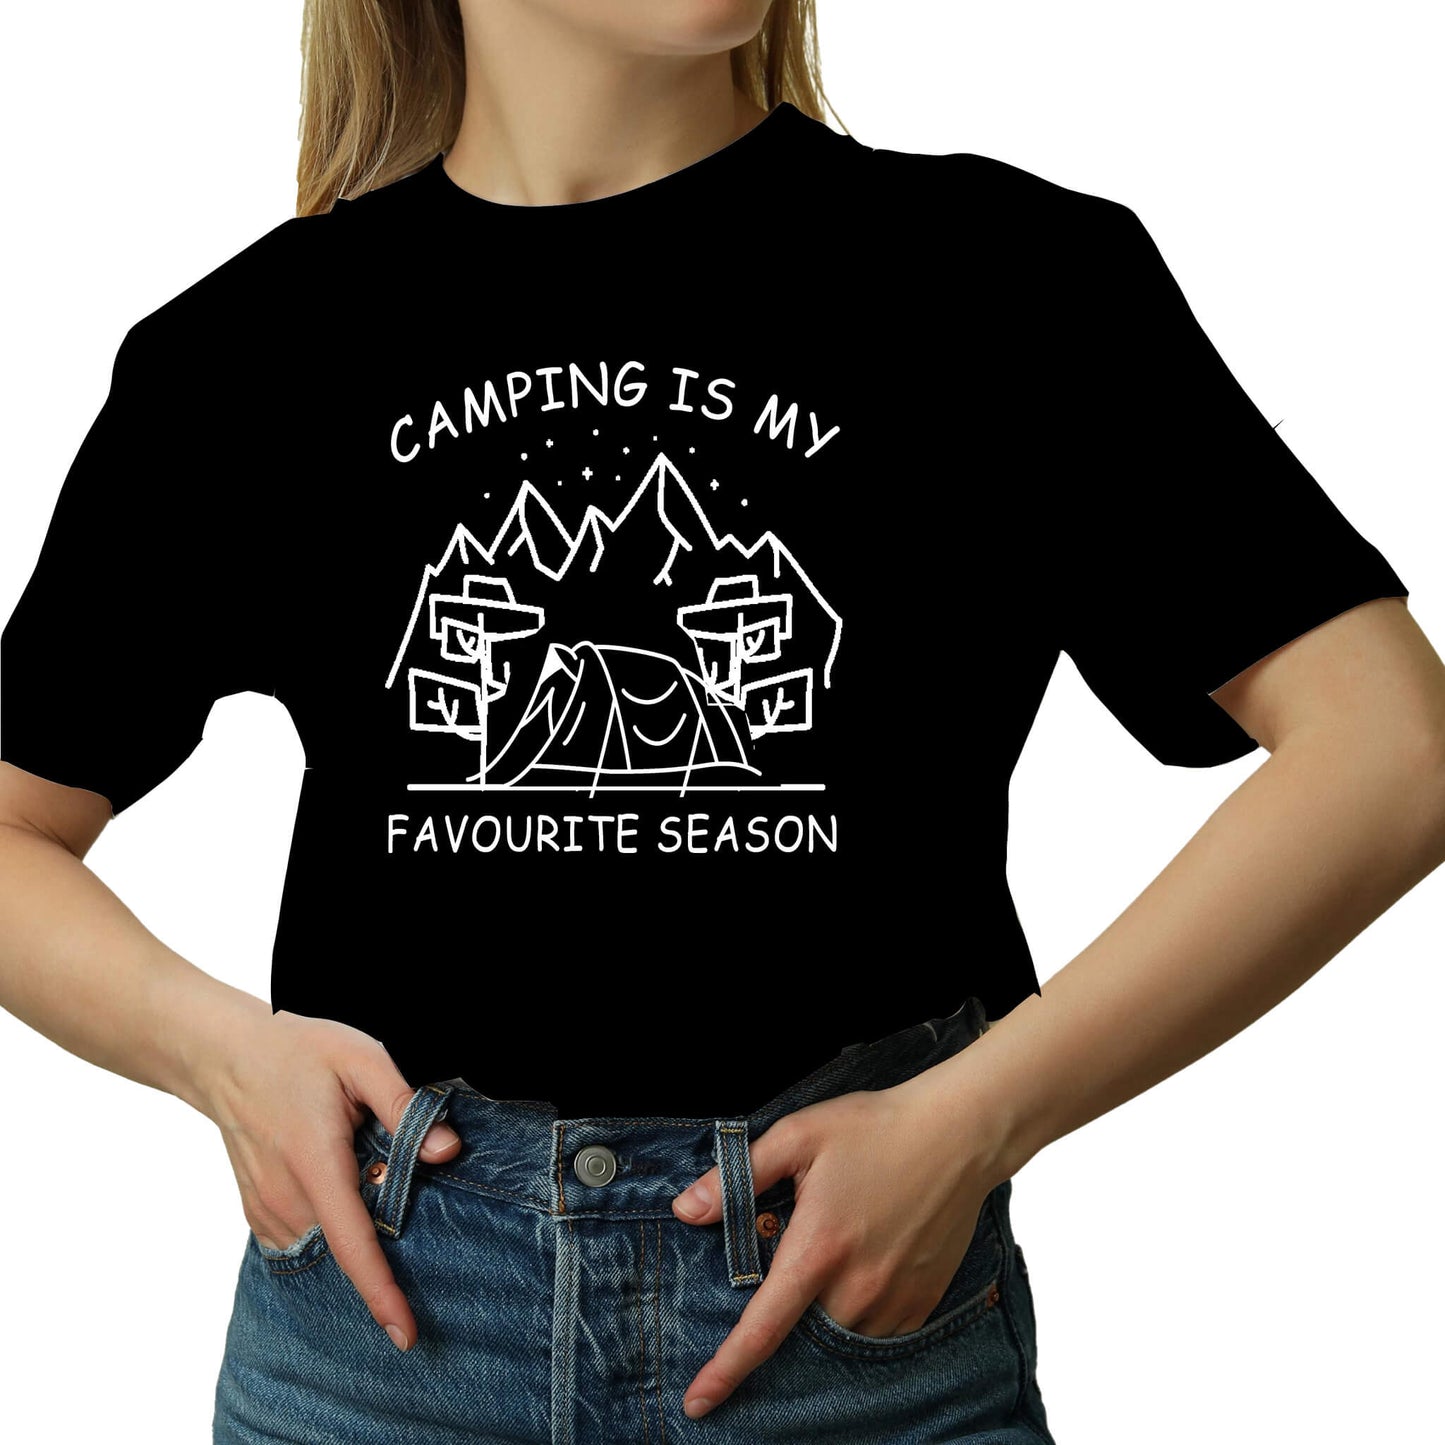  "Black Graphic tee with an illustration of a tent, surrounded by nature. Text reads: 'Camping is my favorite season.' Celebrate the great outdoors!"